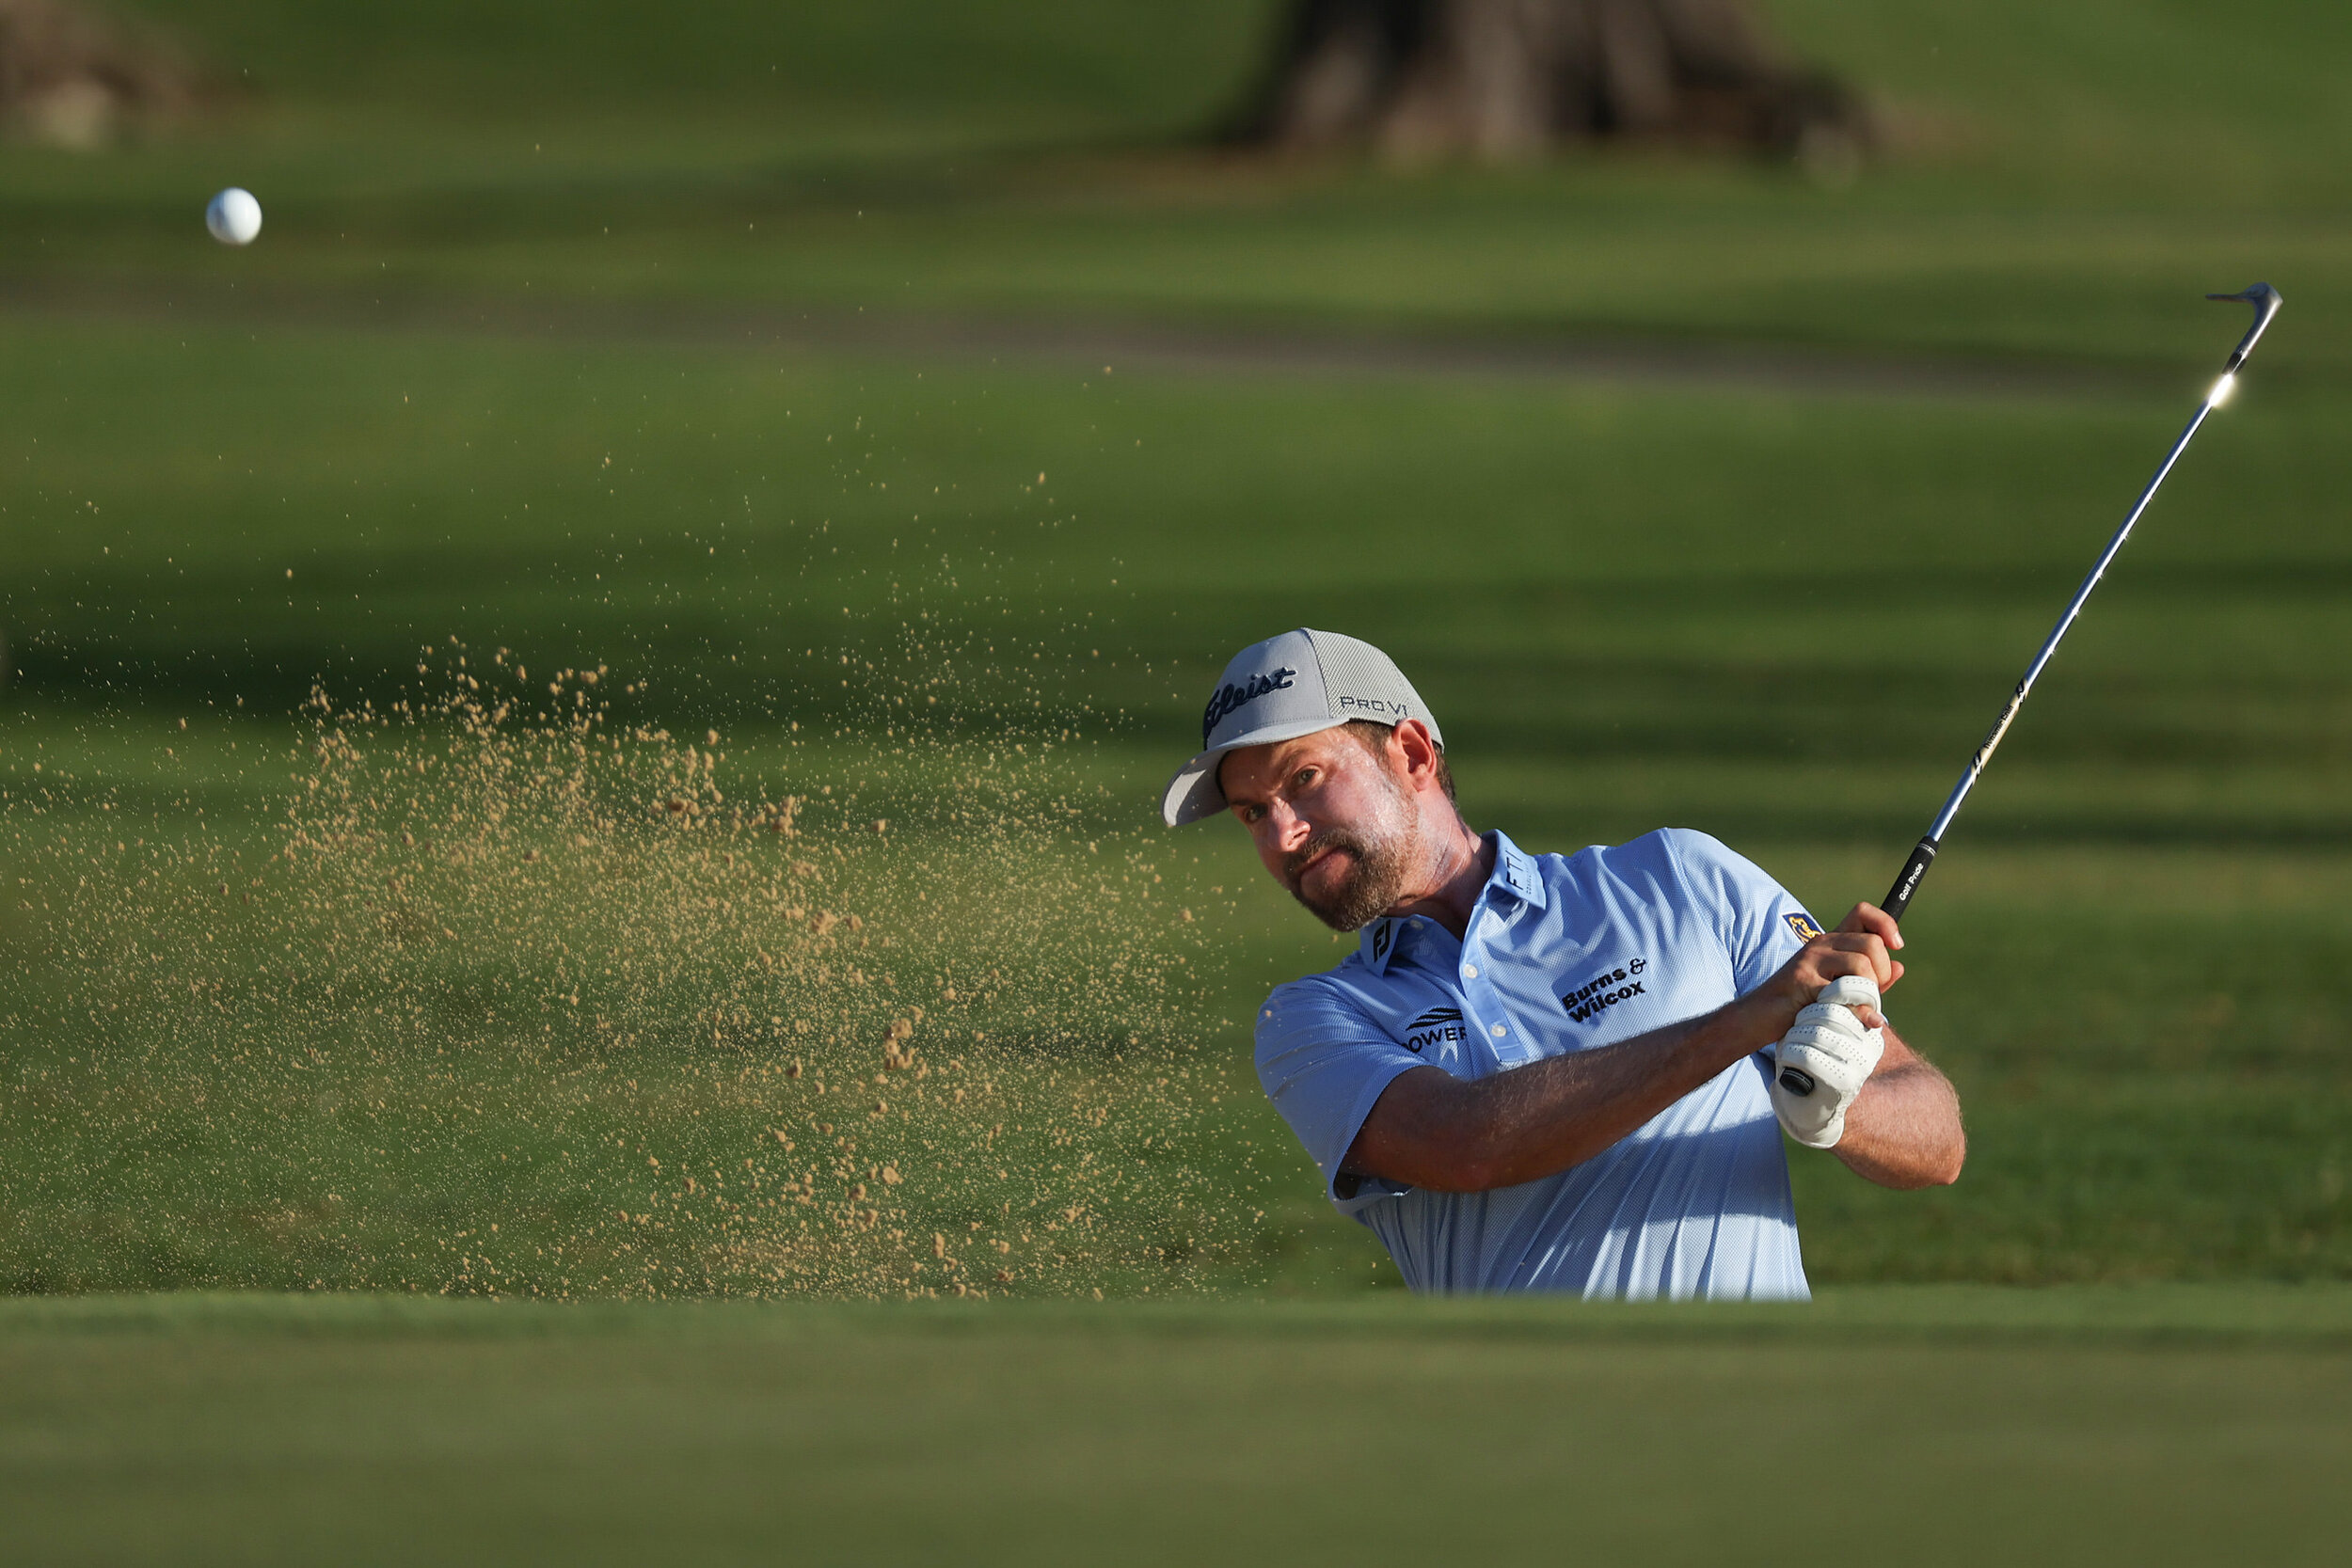  HONOLULU, HAWAII - JANUARY 15: Webb Simpson of the United States plays a shot from a bunker on the 13th hole during the second round of the Sony Open in Hawaii at the Waialae Country Club on January 15, 2021 in Honolulu, Hawaii. (Photo by Gregory Sh